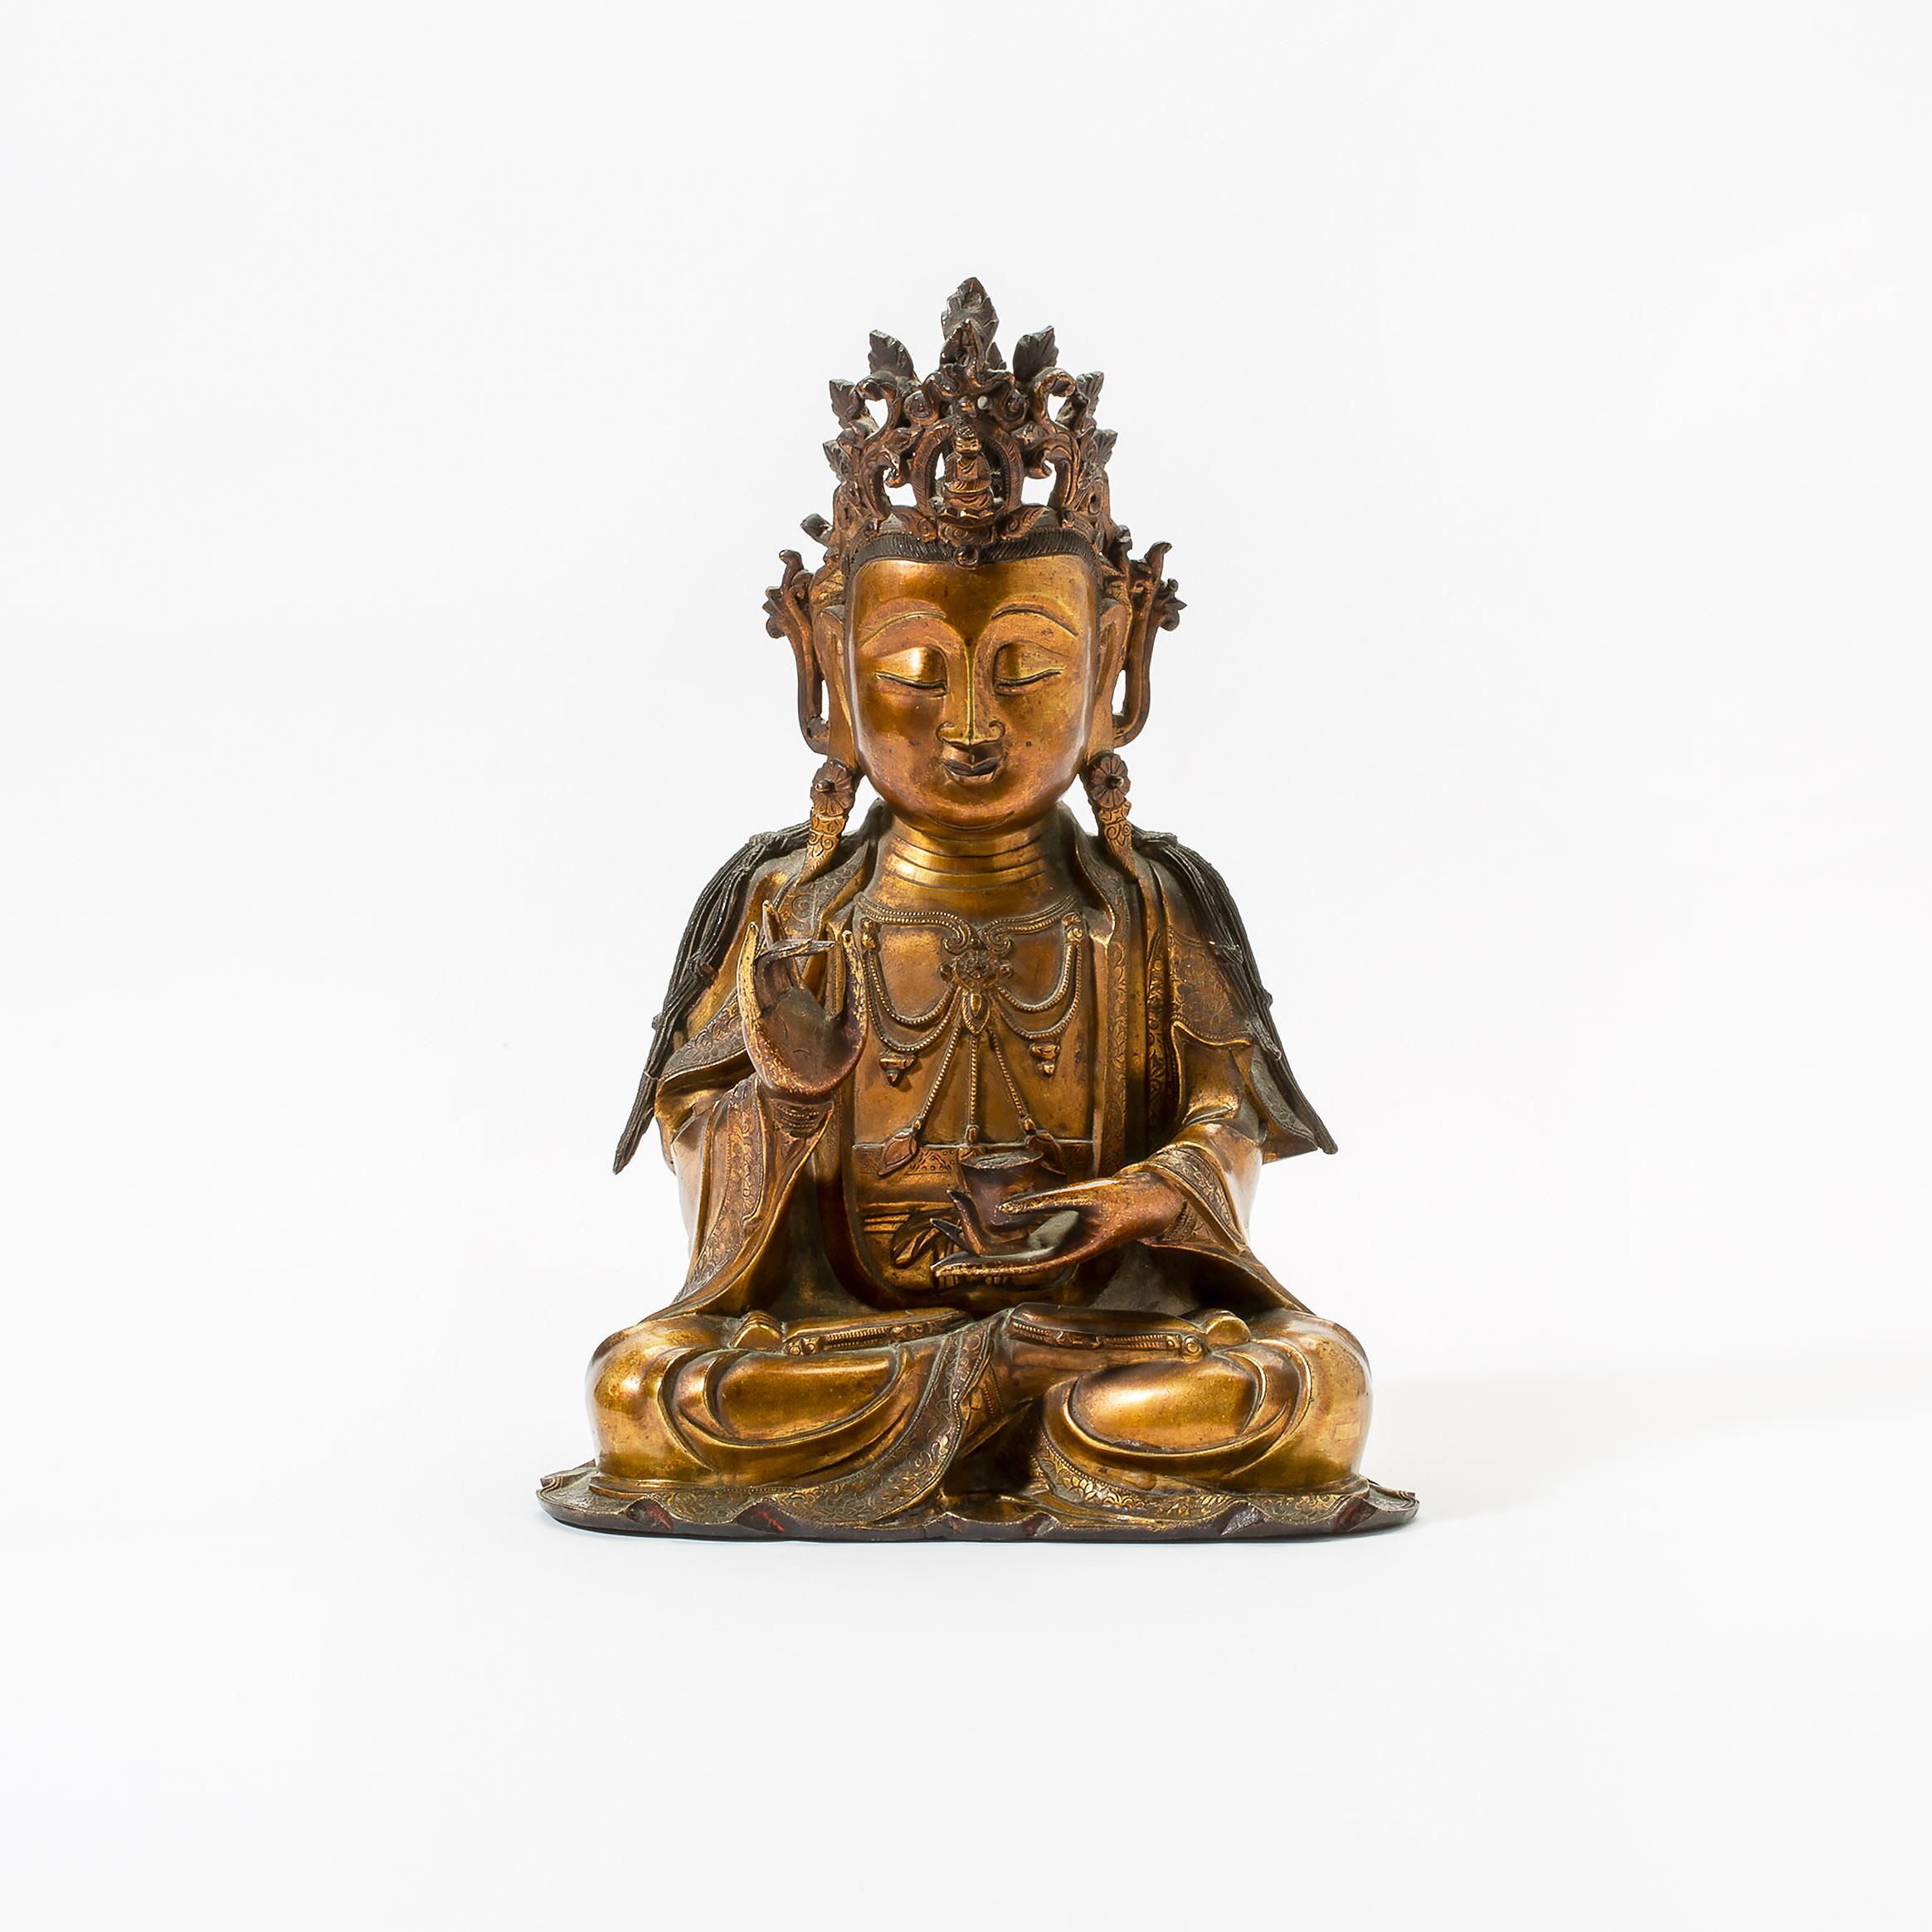 Cast Very Fine and Serene Chinese Gilt-Bronze Figure of Guanyin, 16th Century